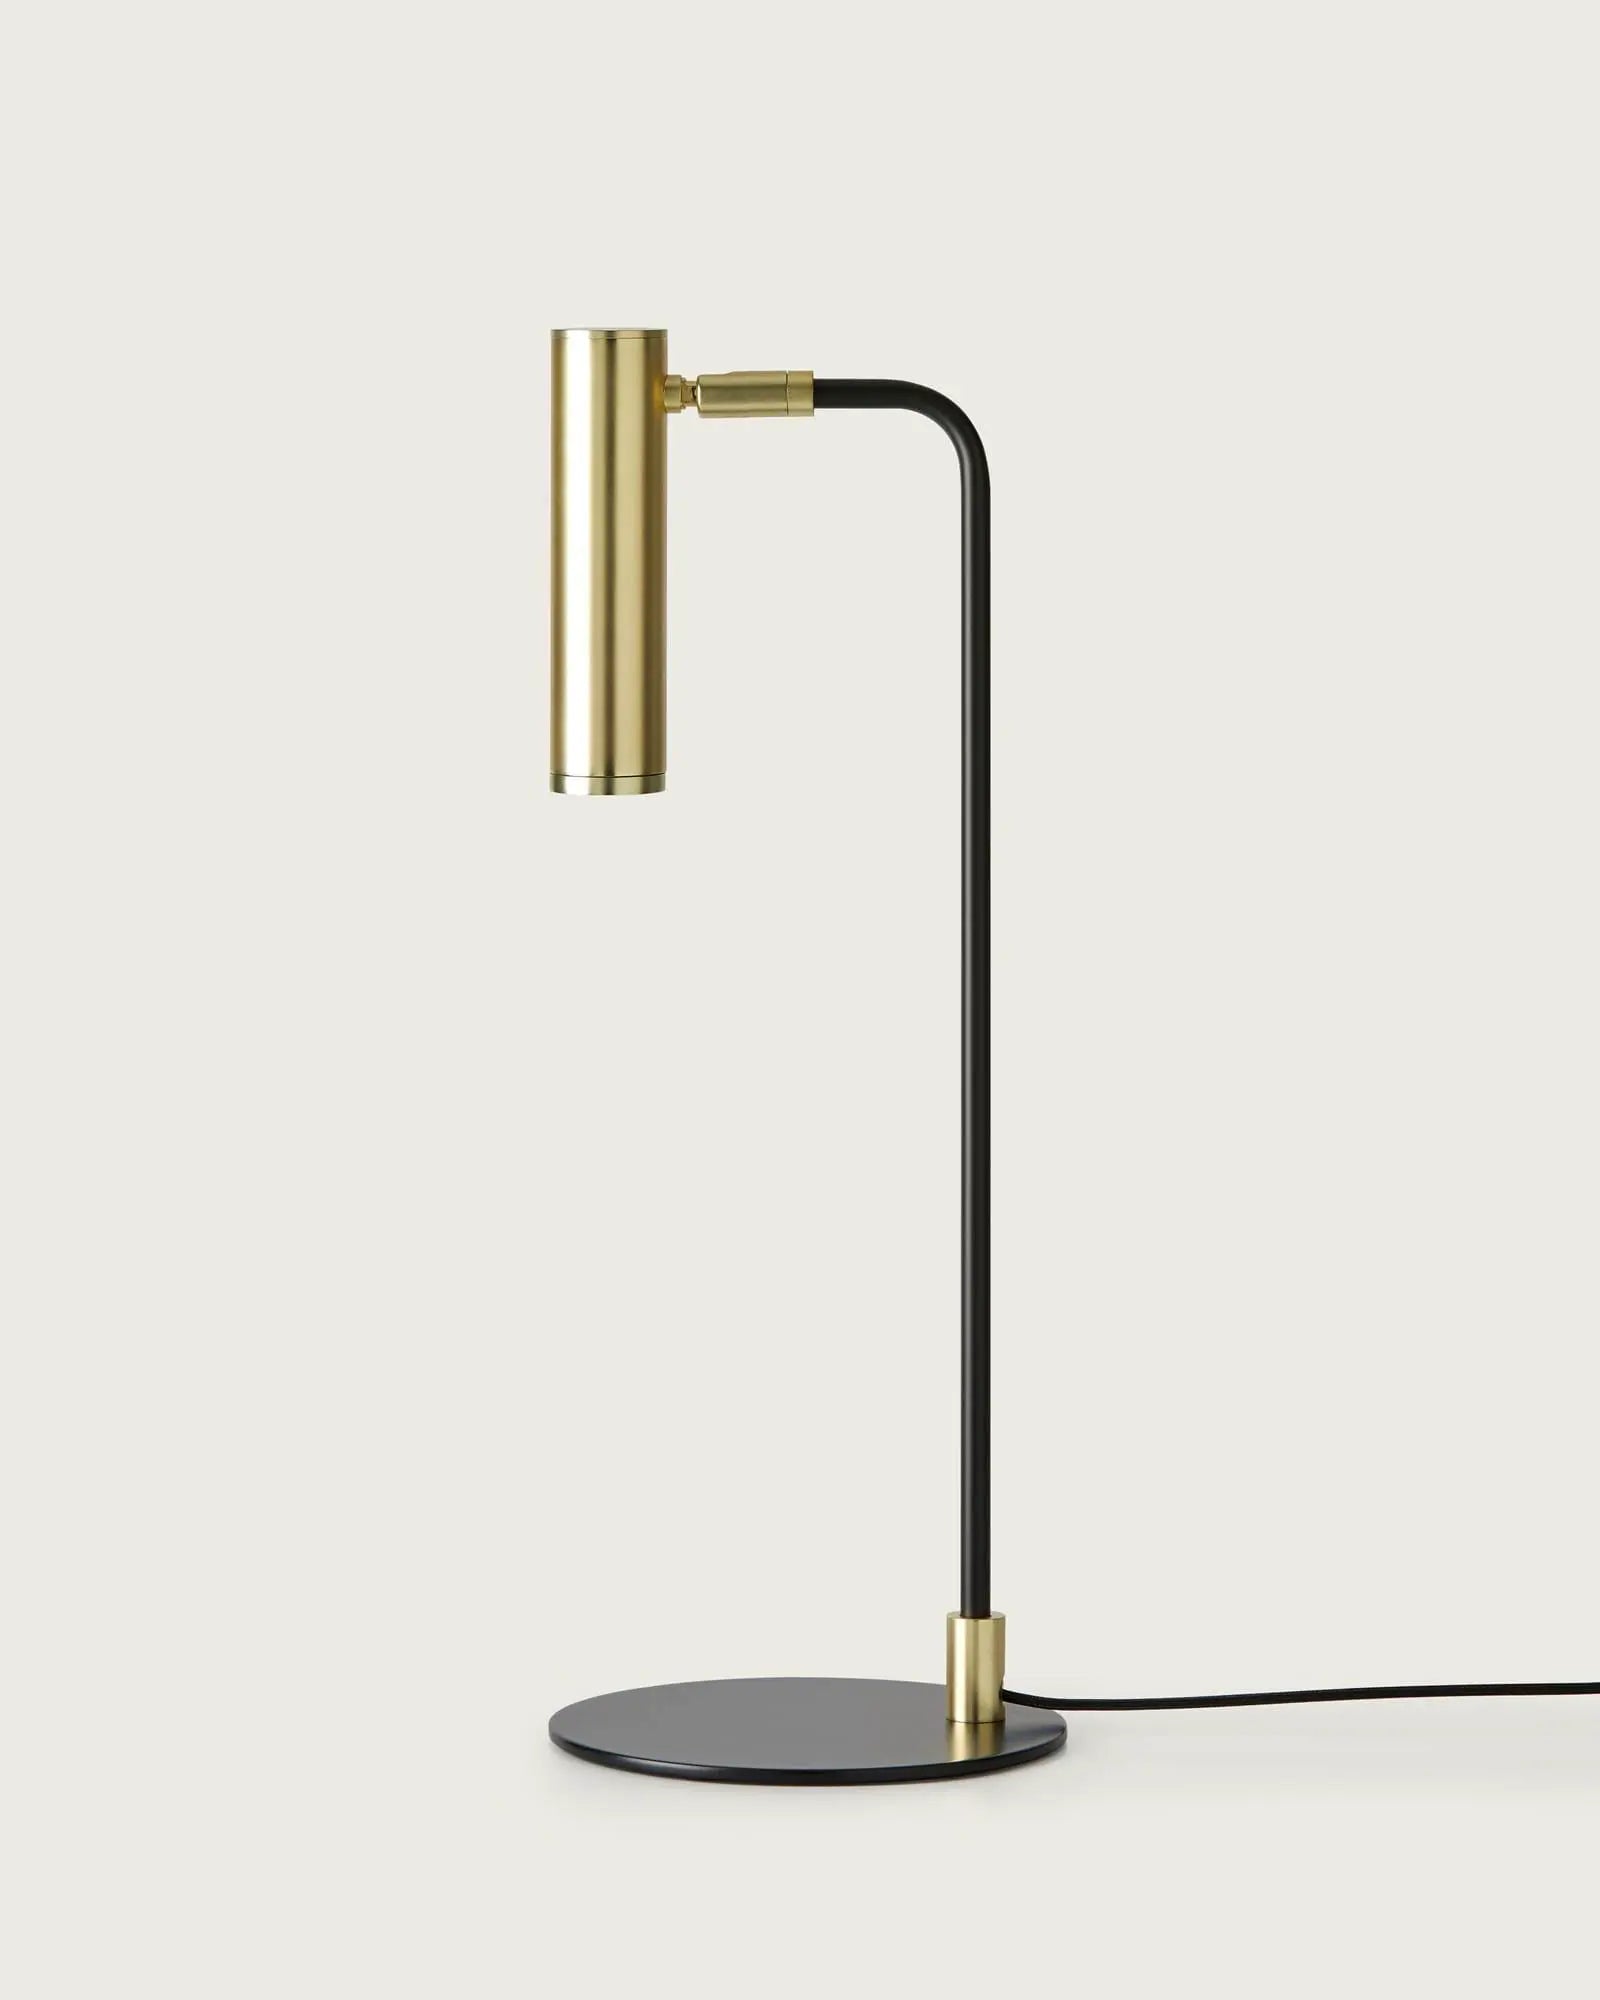 Maru Table lamp with black body and base, brass head